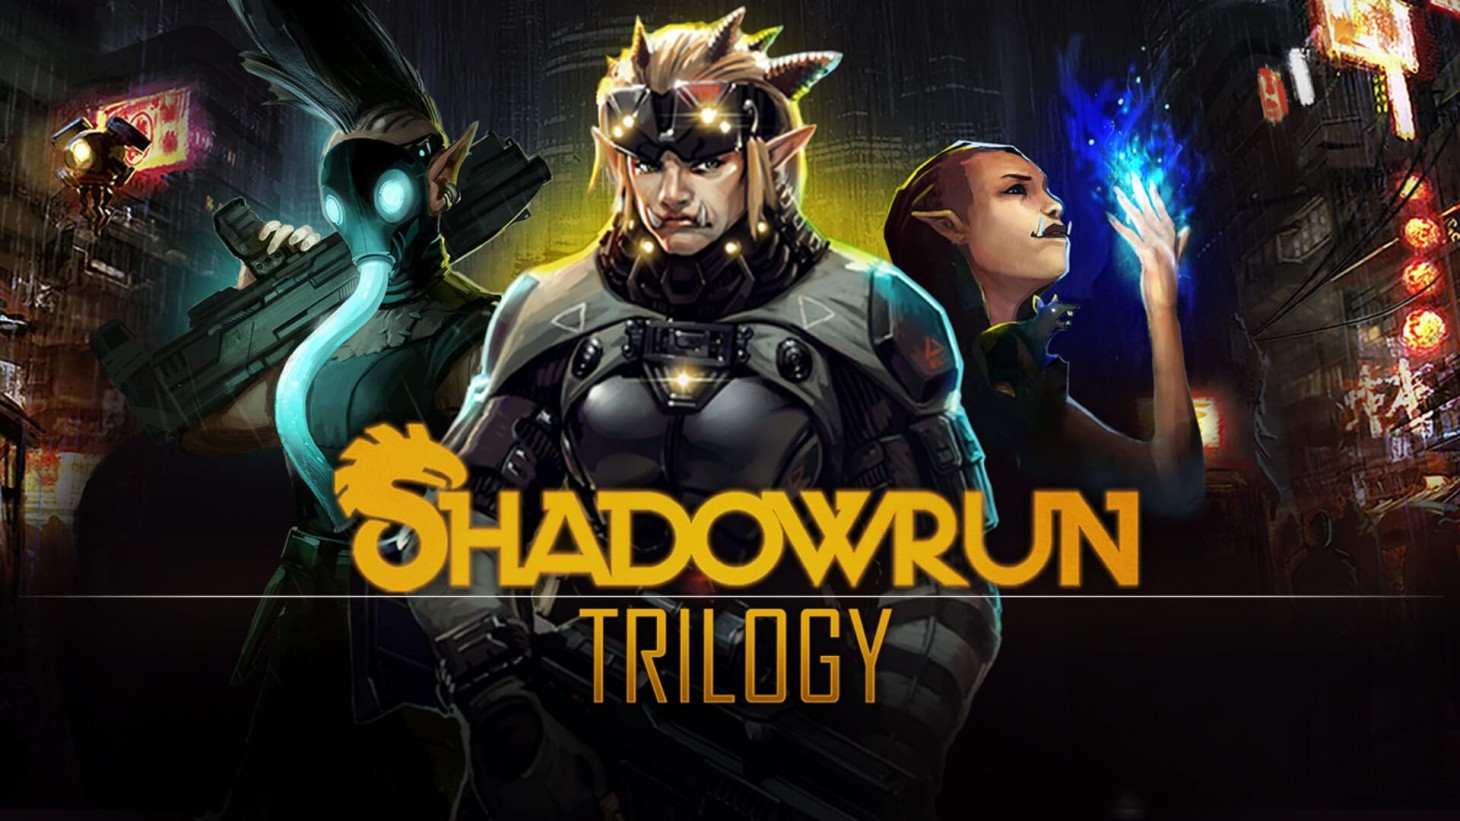 Shadowrun Trilogy is coming to Xbox Game Pass in June 2022